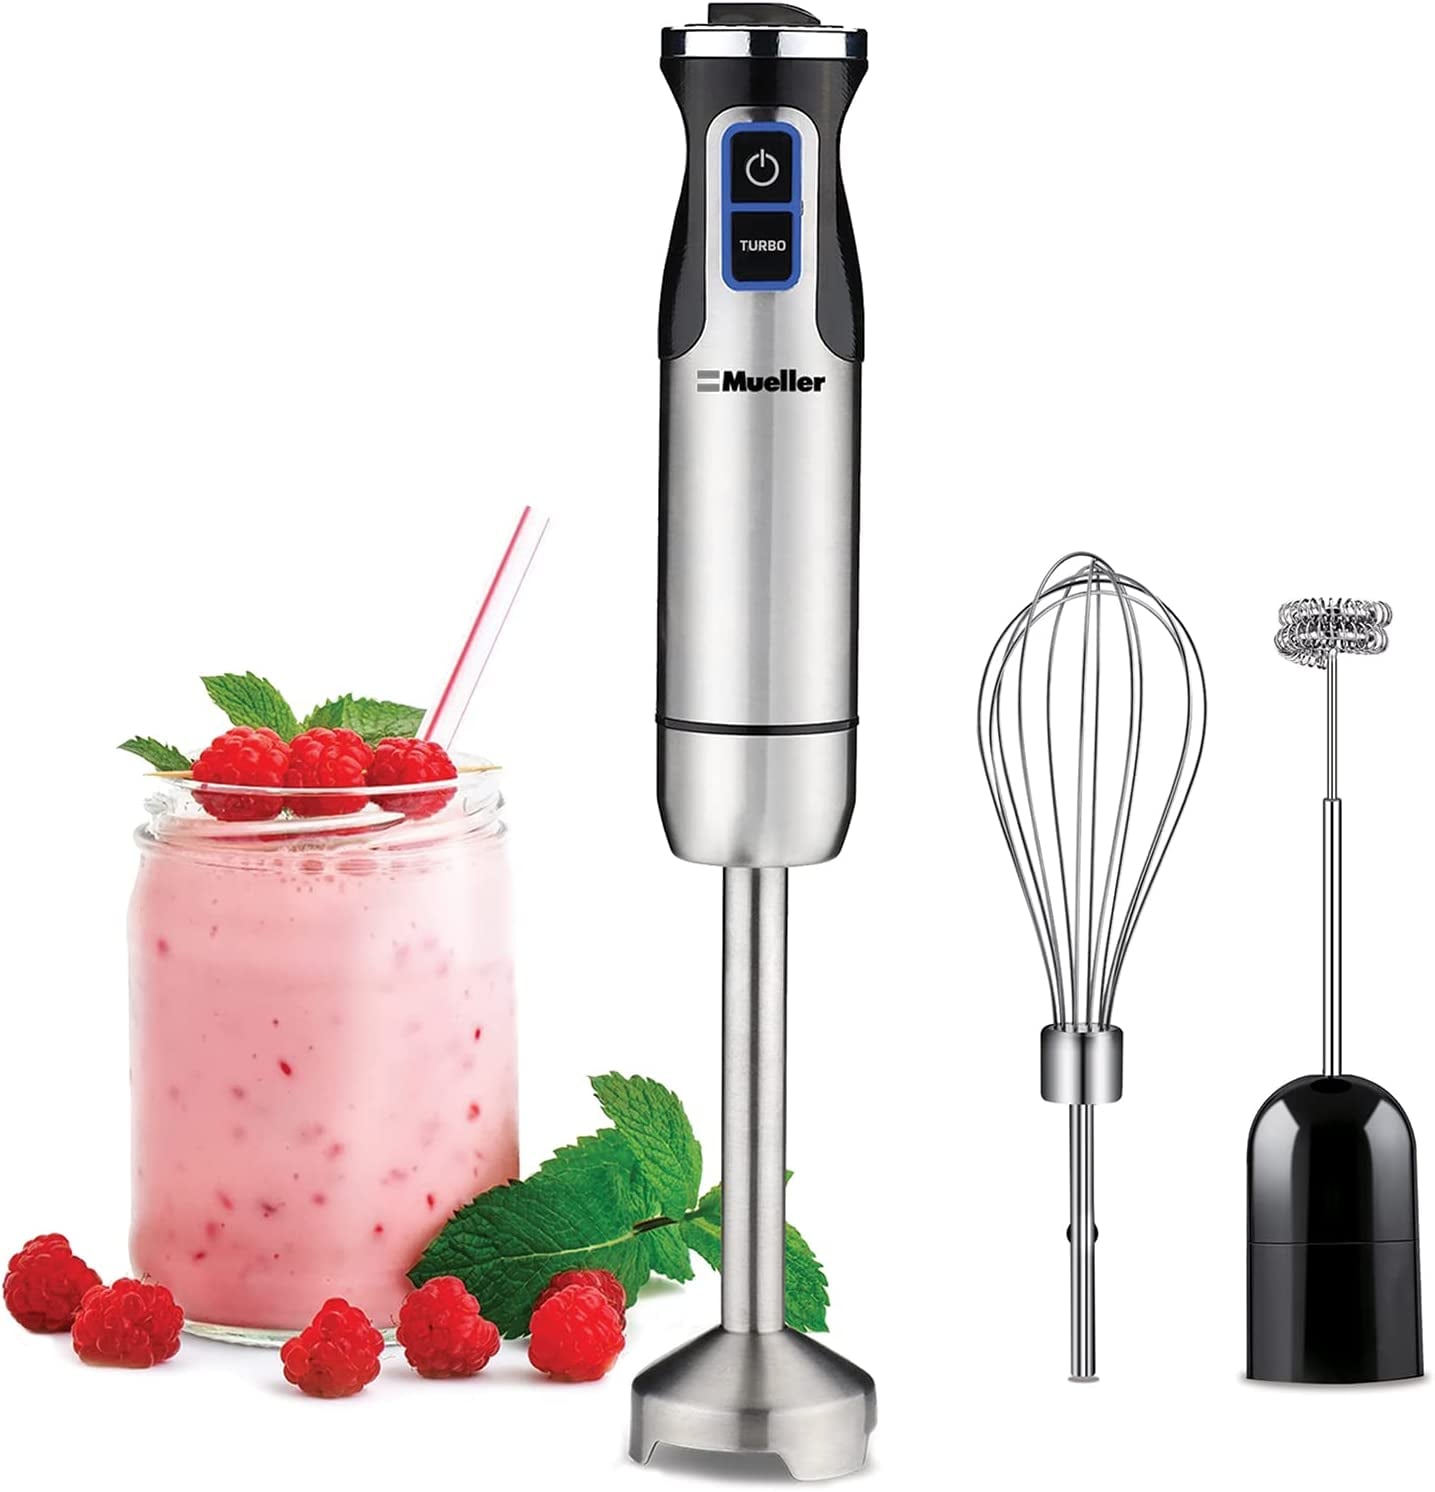 Cuisinart Immersion Hand Blender w/ Storage Bag Only $28 at Costco